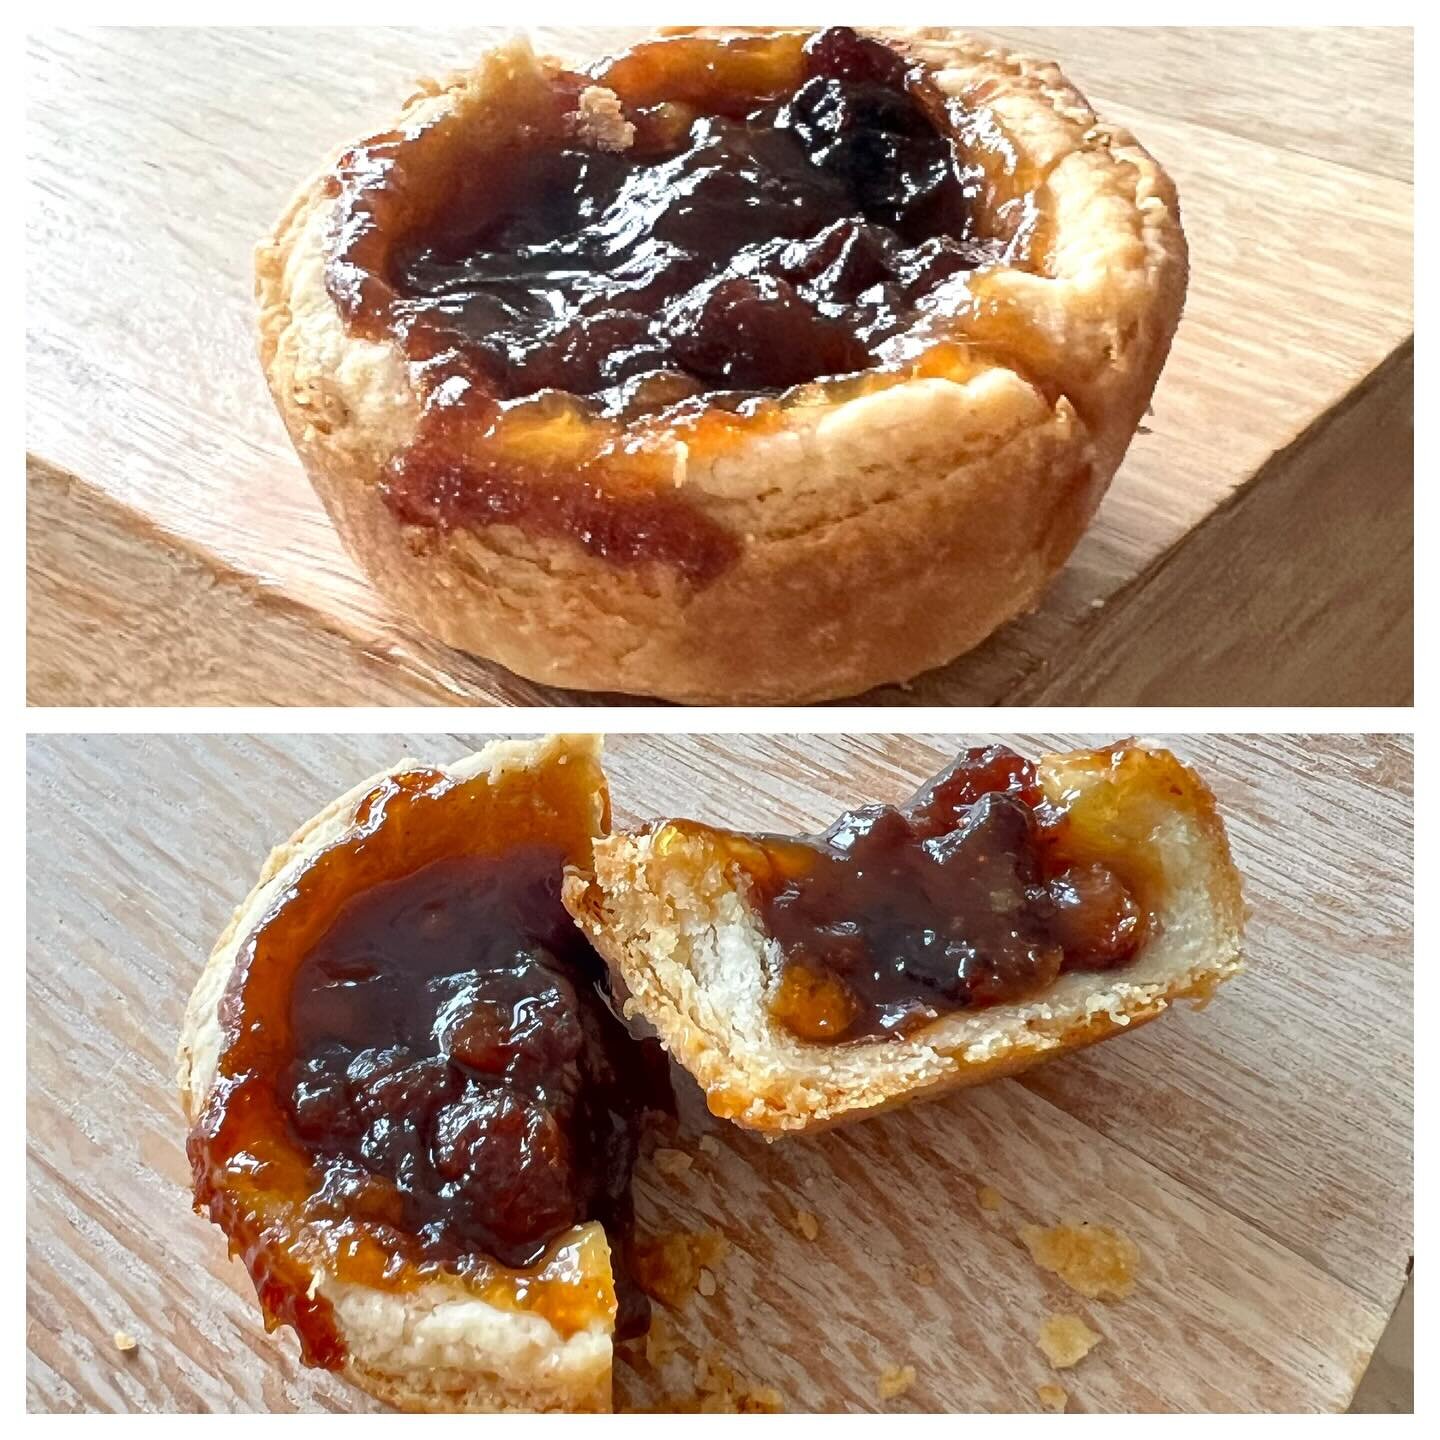 Mince tarts for Christmas. Super flaky easy pastry is my Mom&rsquo;s 70 year old recipe&mdash;and it&rsquo;s in the cookbook with step by steps. Click link in bio. #holidaybaking #christmasbaking #mincetarts #mincemeat #tarts #pastry #globalpantrycoo